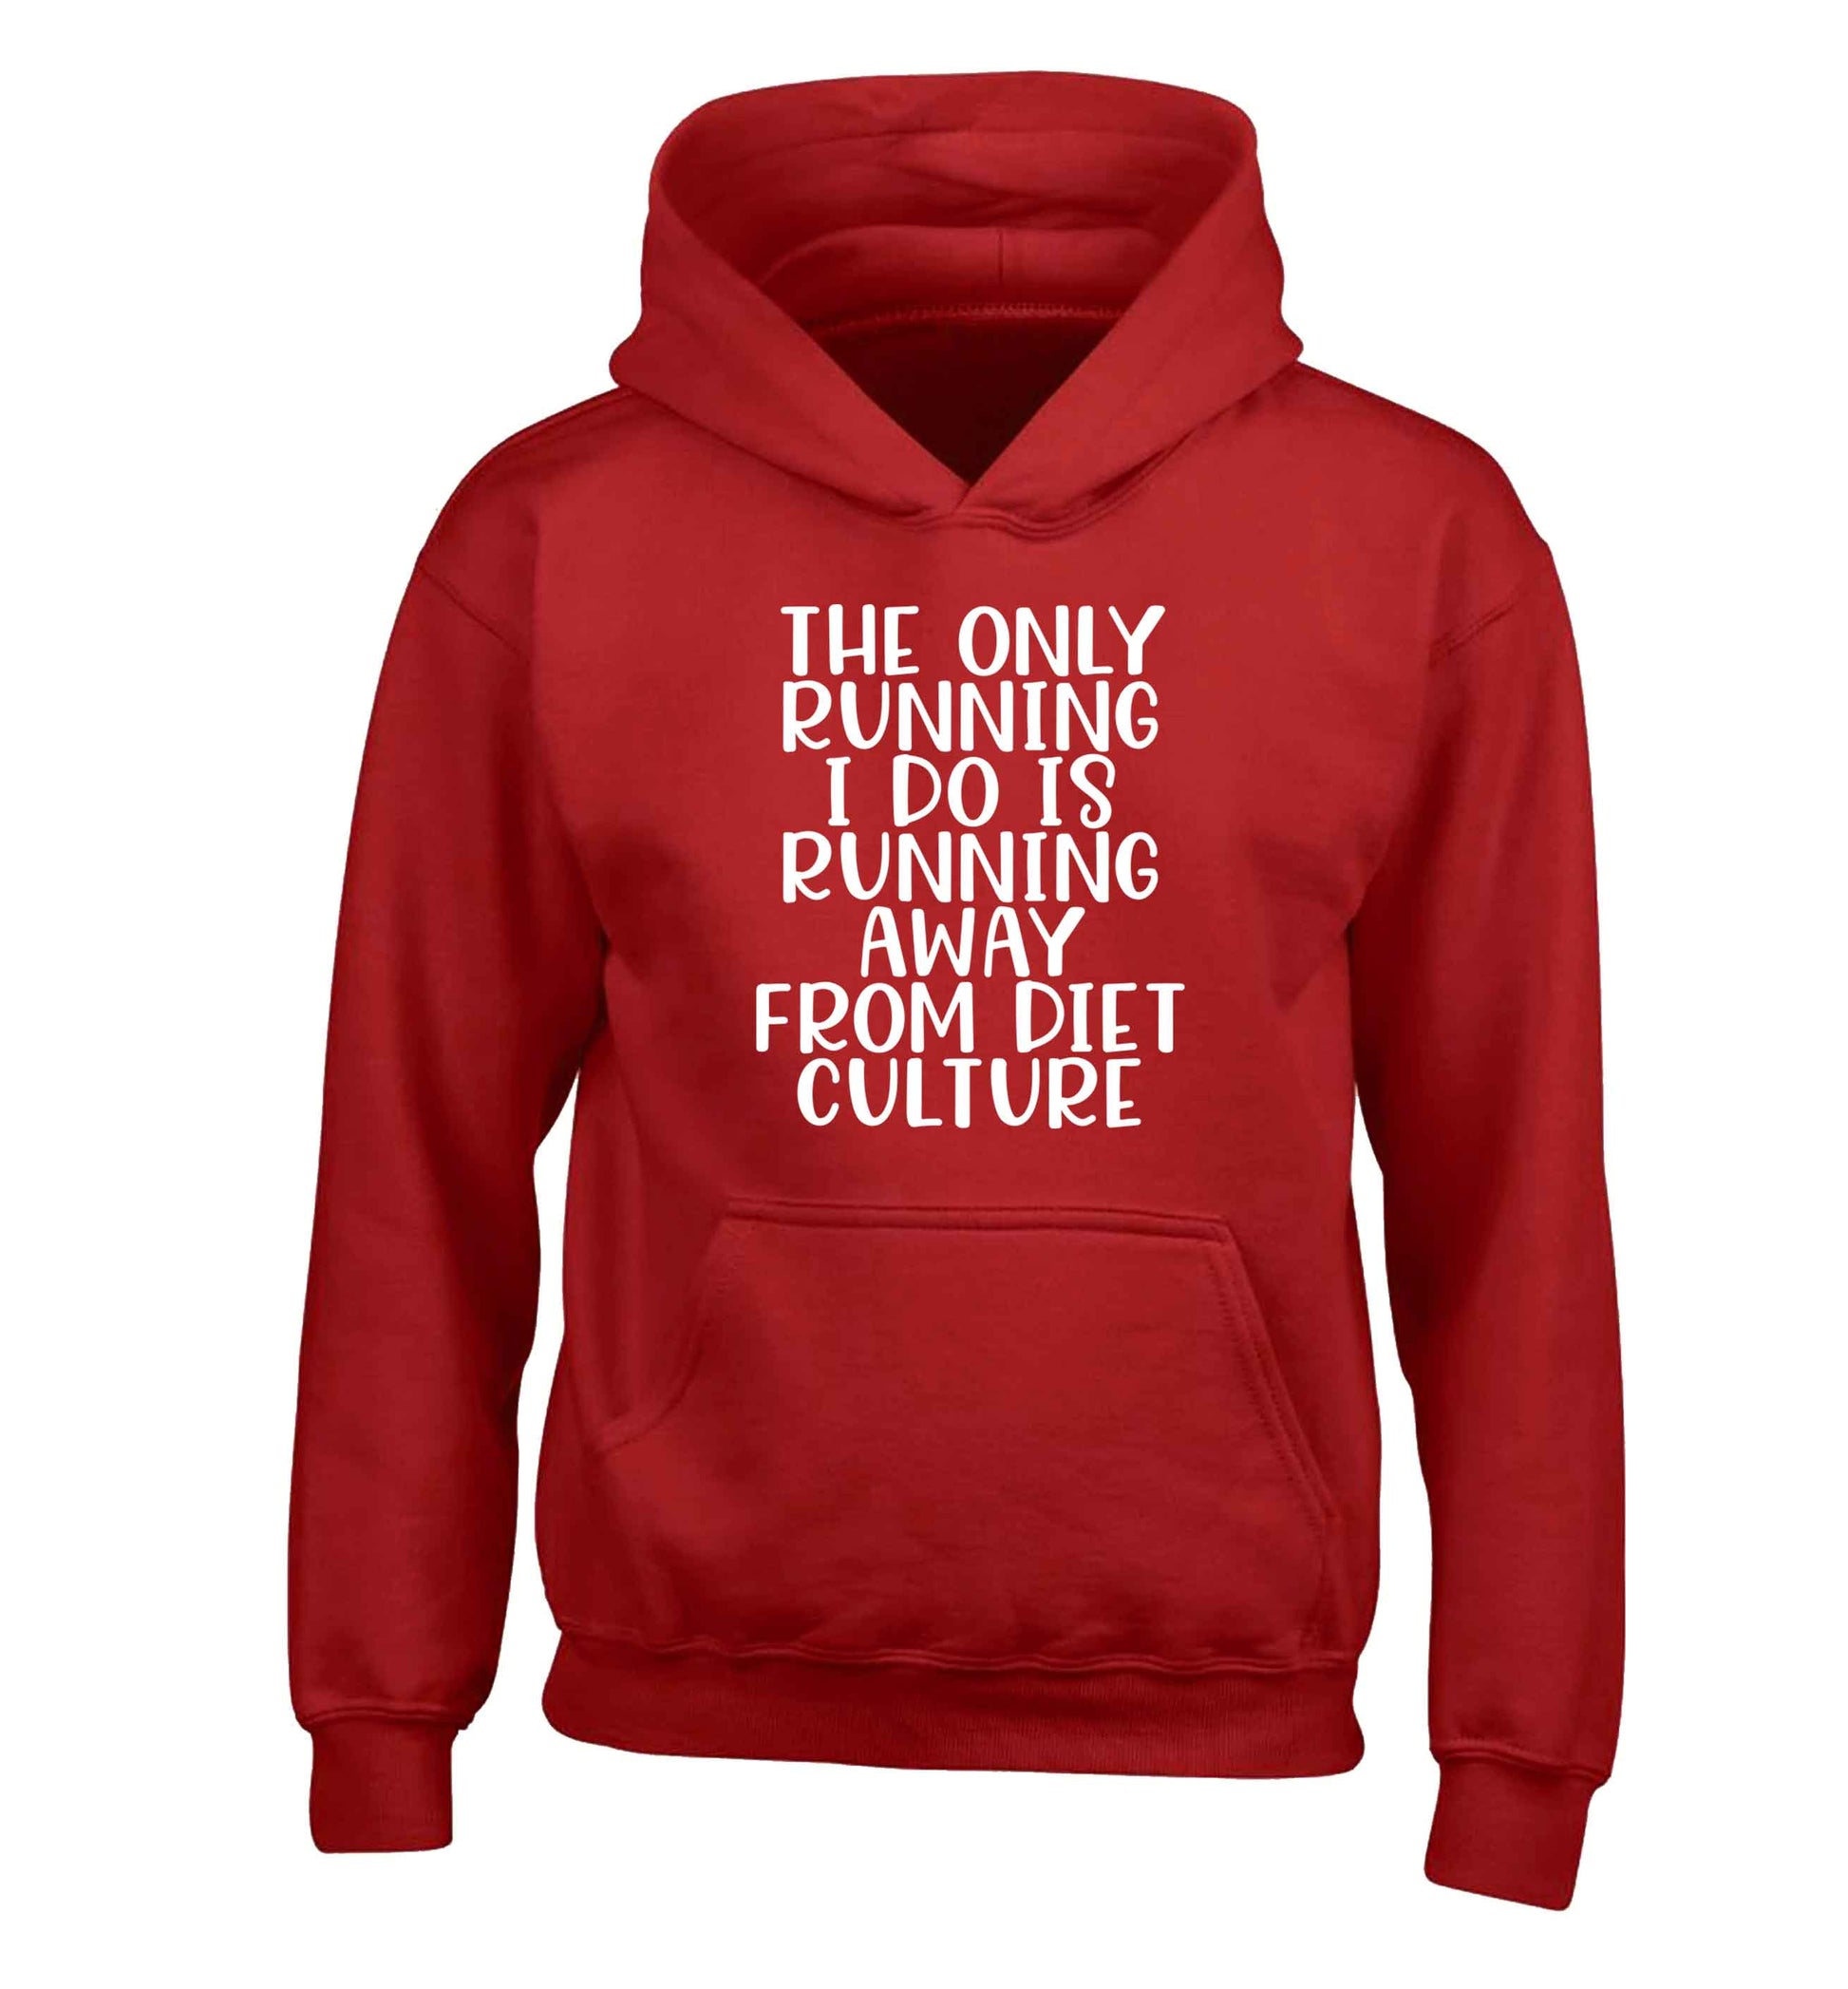 The only running I do is running away from diet culture children's red hoodie 12-13 Years